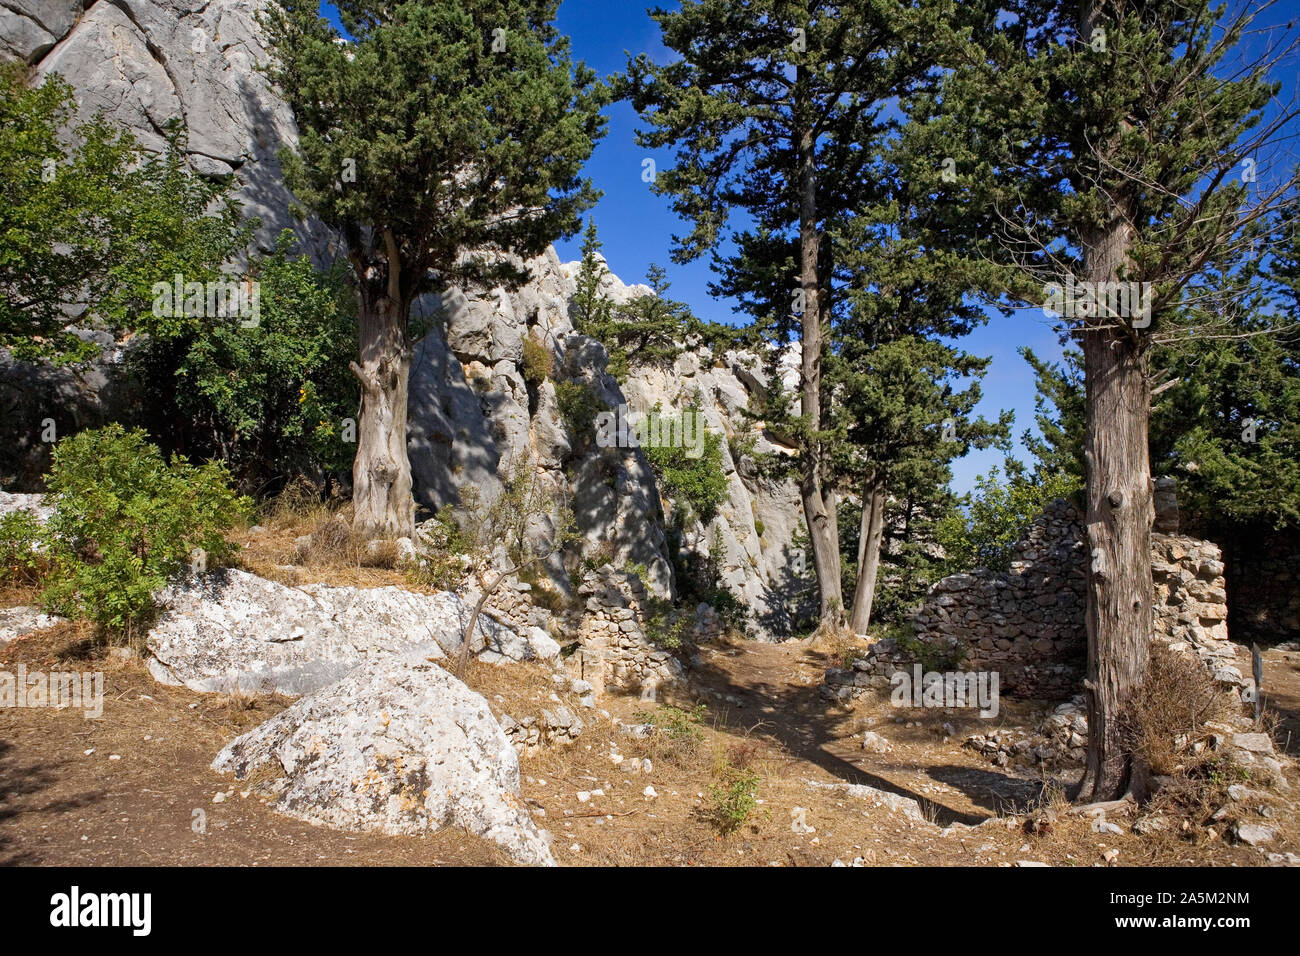 The ruinous and overgrown Upper Ward, Saint Hilarion Castle, Northern Cyprus Stock Photo